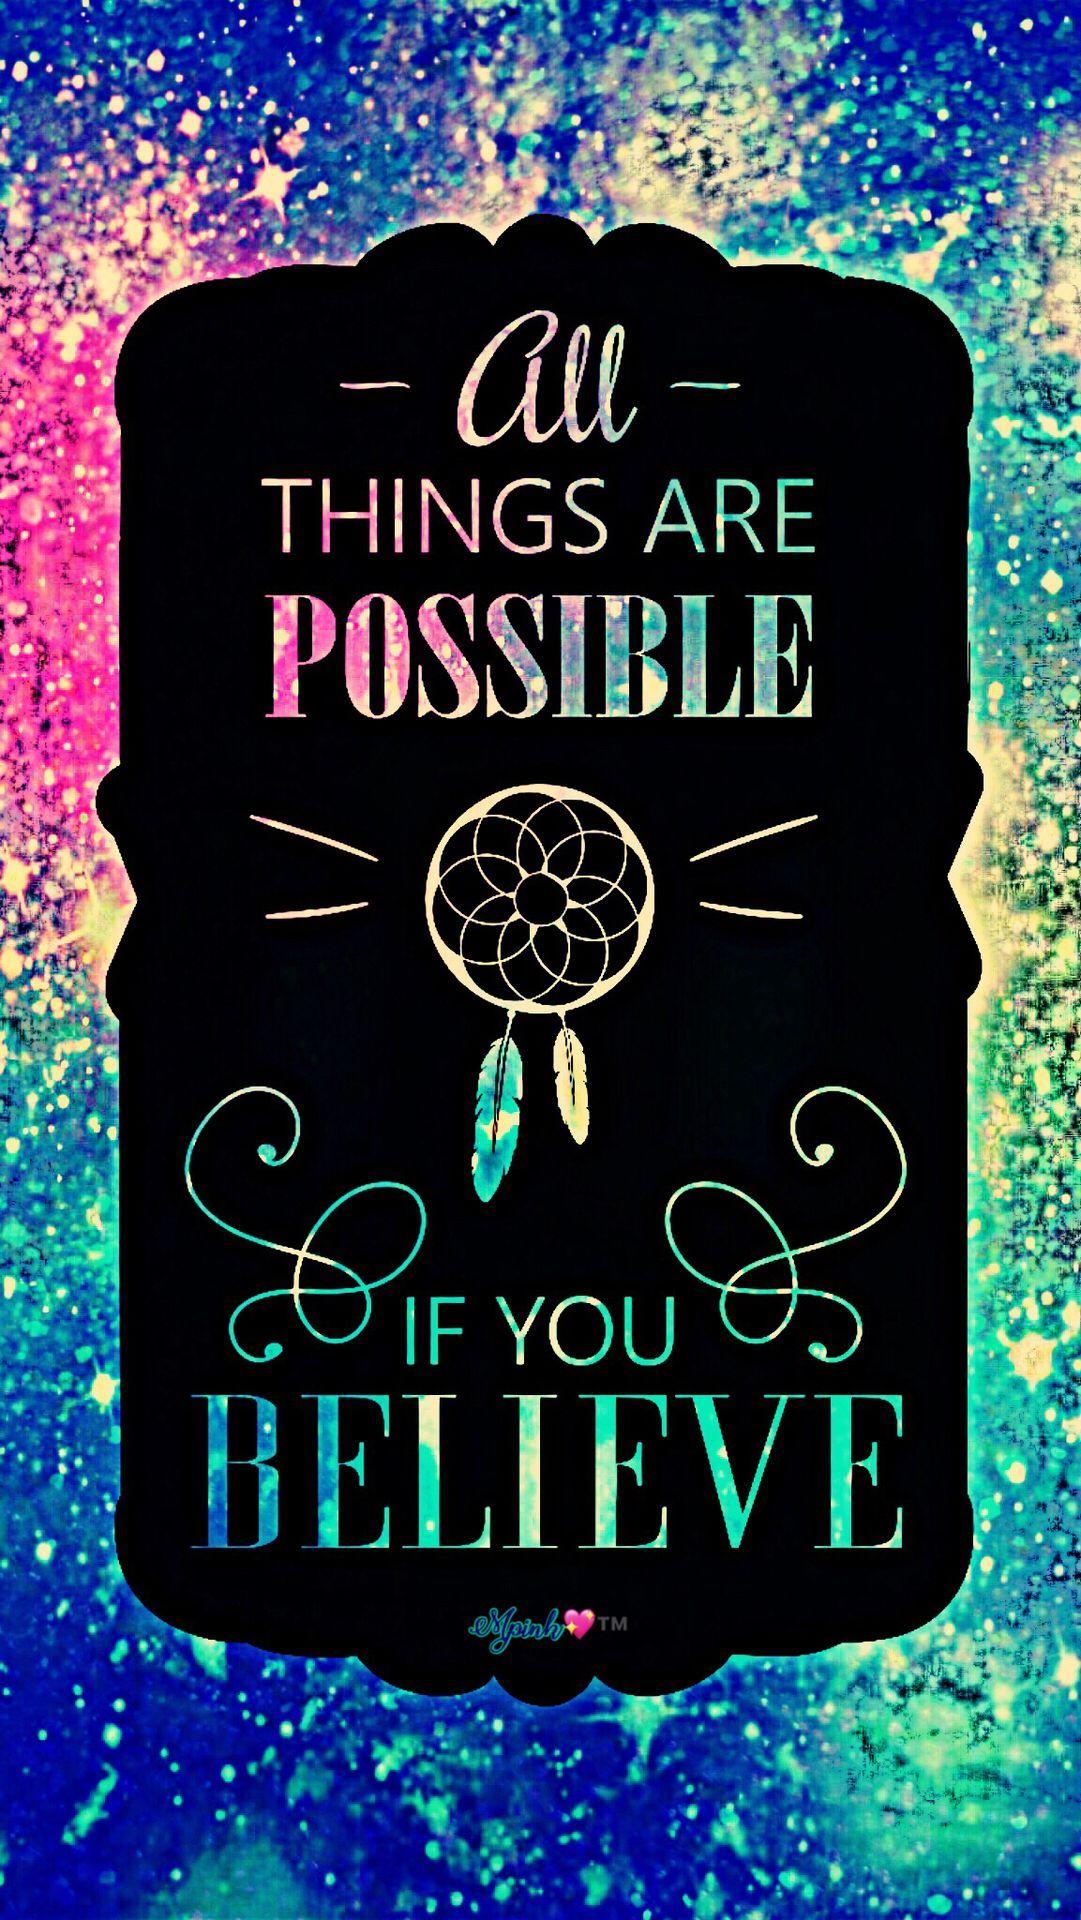 All Things Are Possible Galaxy Wallpaper #androidwallpaper